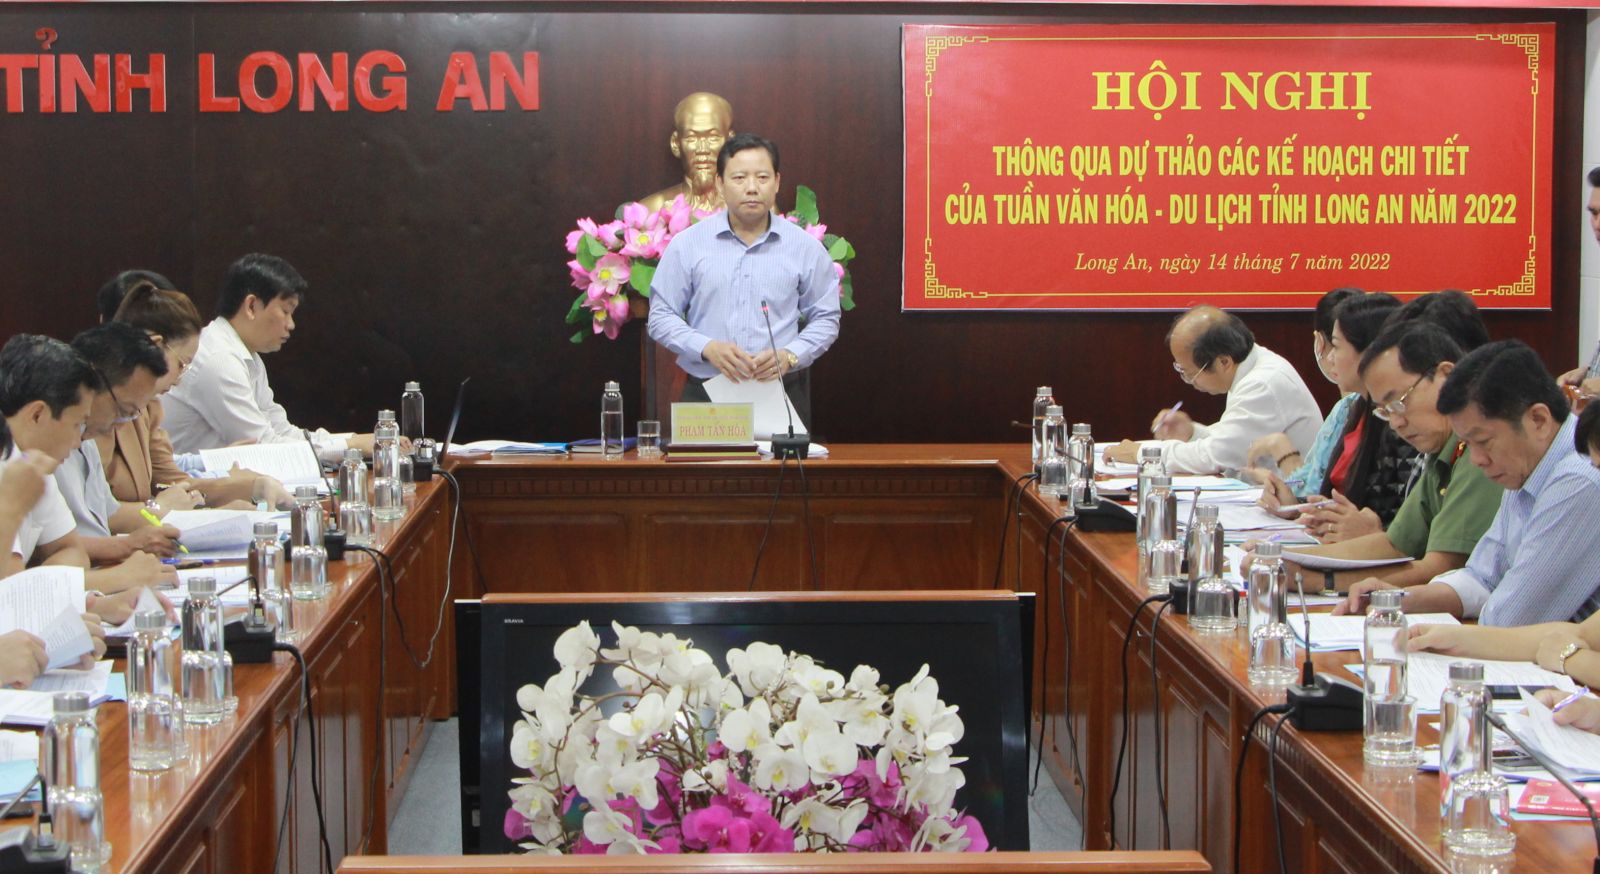 Vice Chairman of the Provincial People's Committee - Pham Tan Hoa chairs the conference